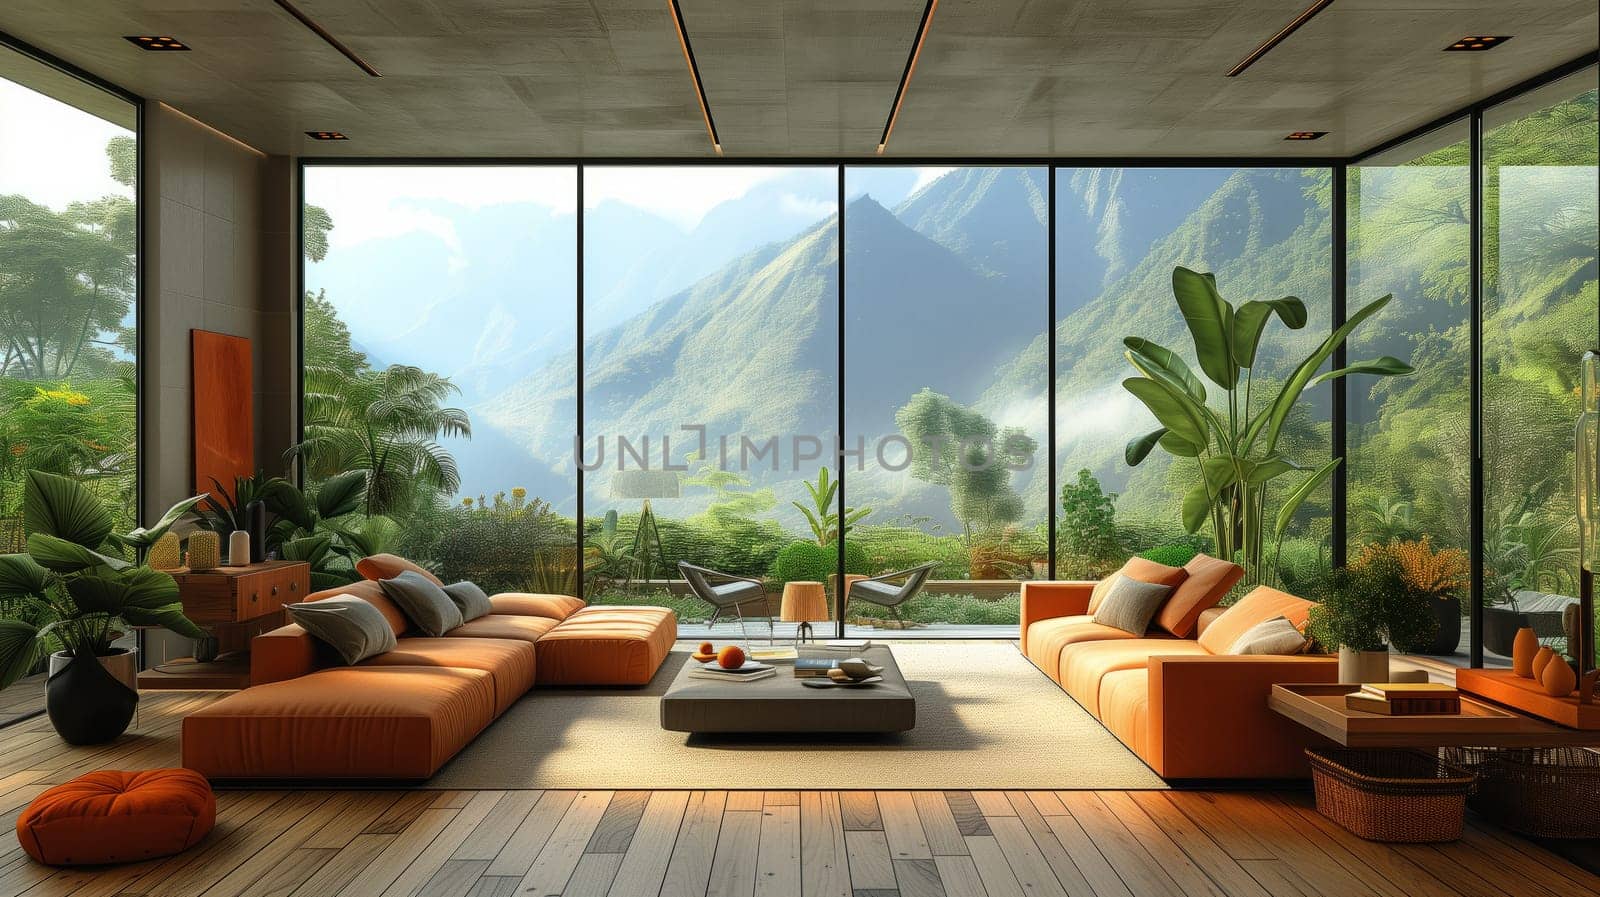 A living room with tall windows overlooking mountains by richwolf